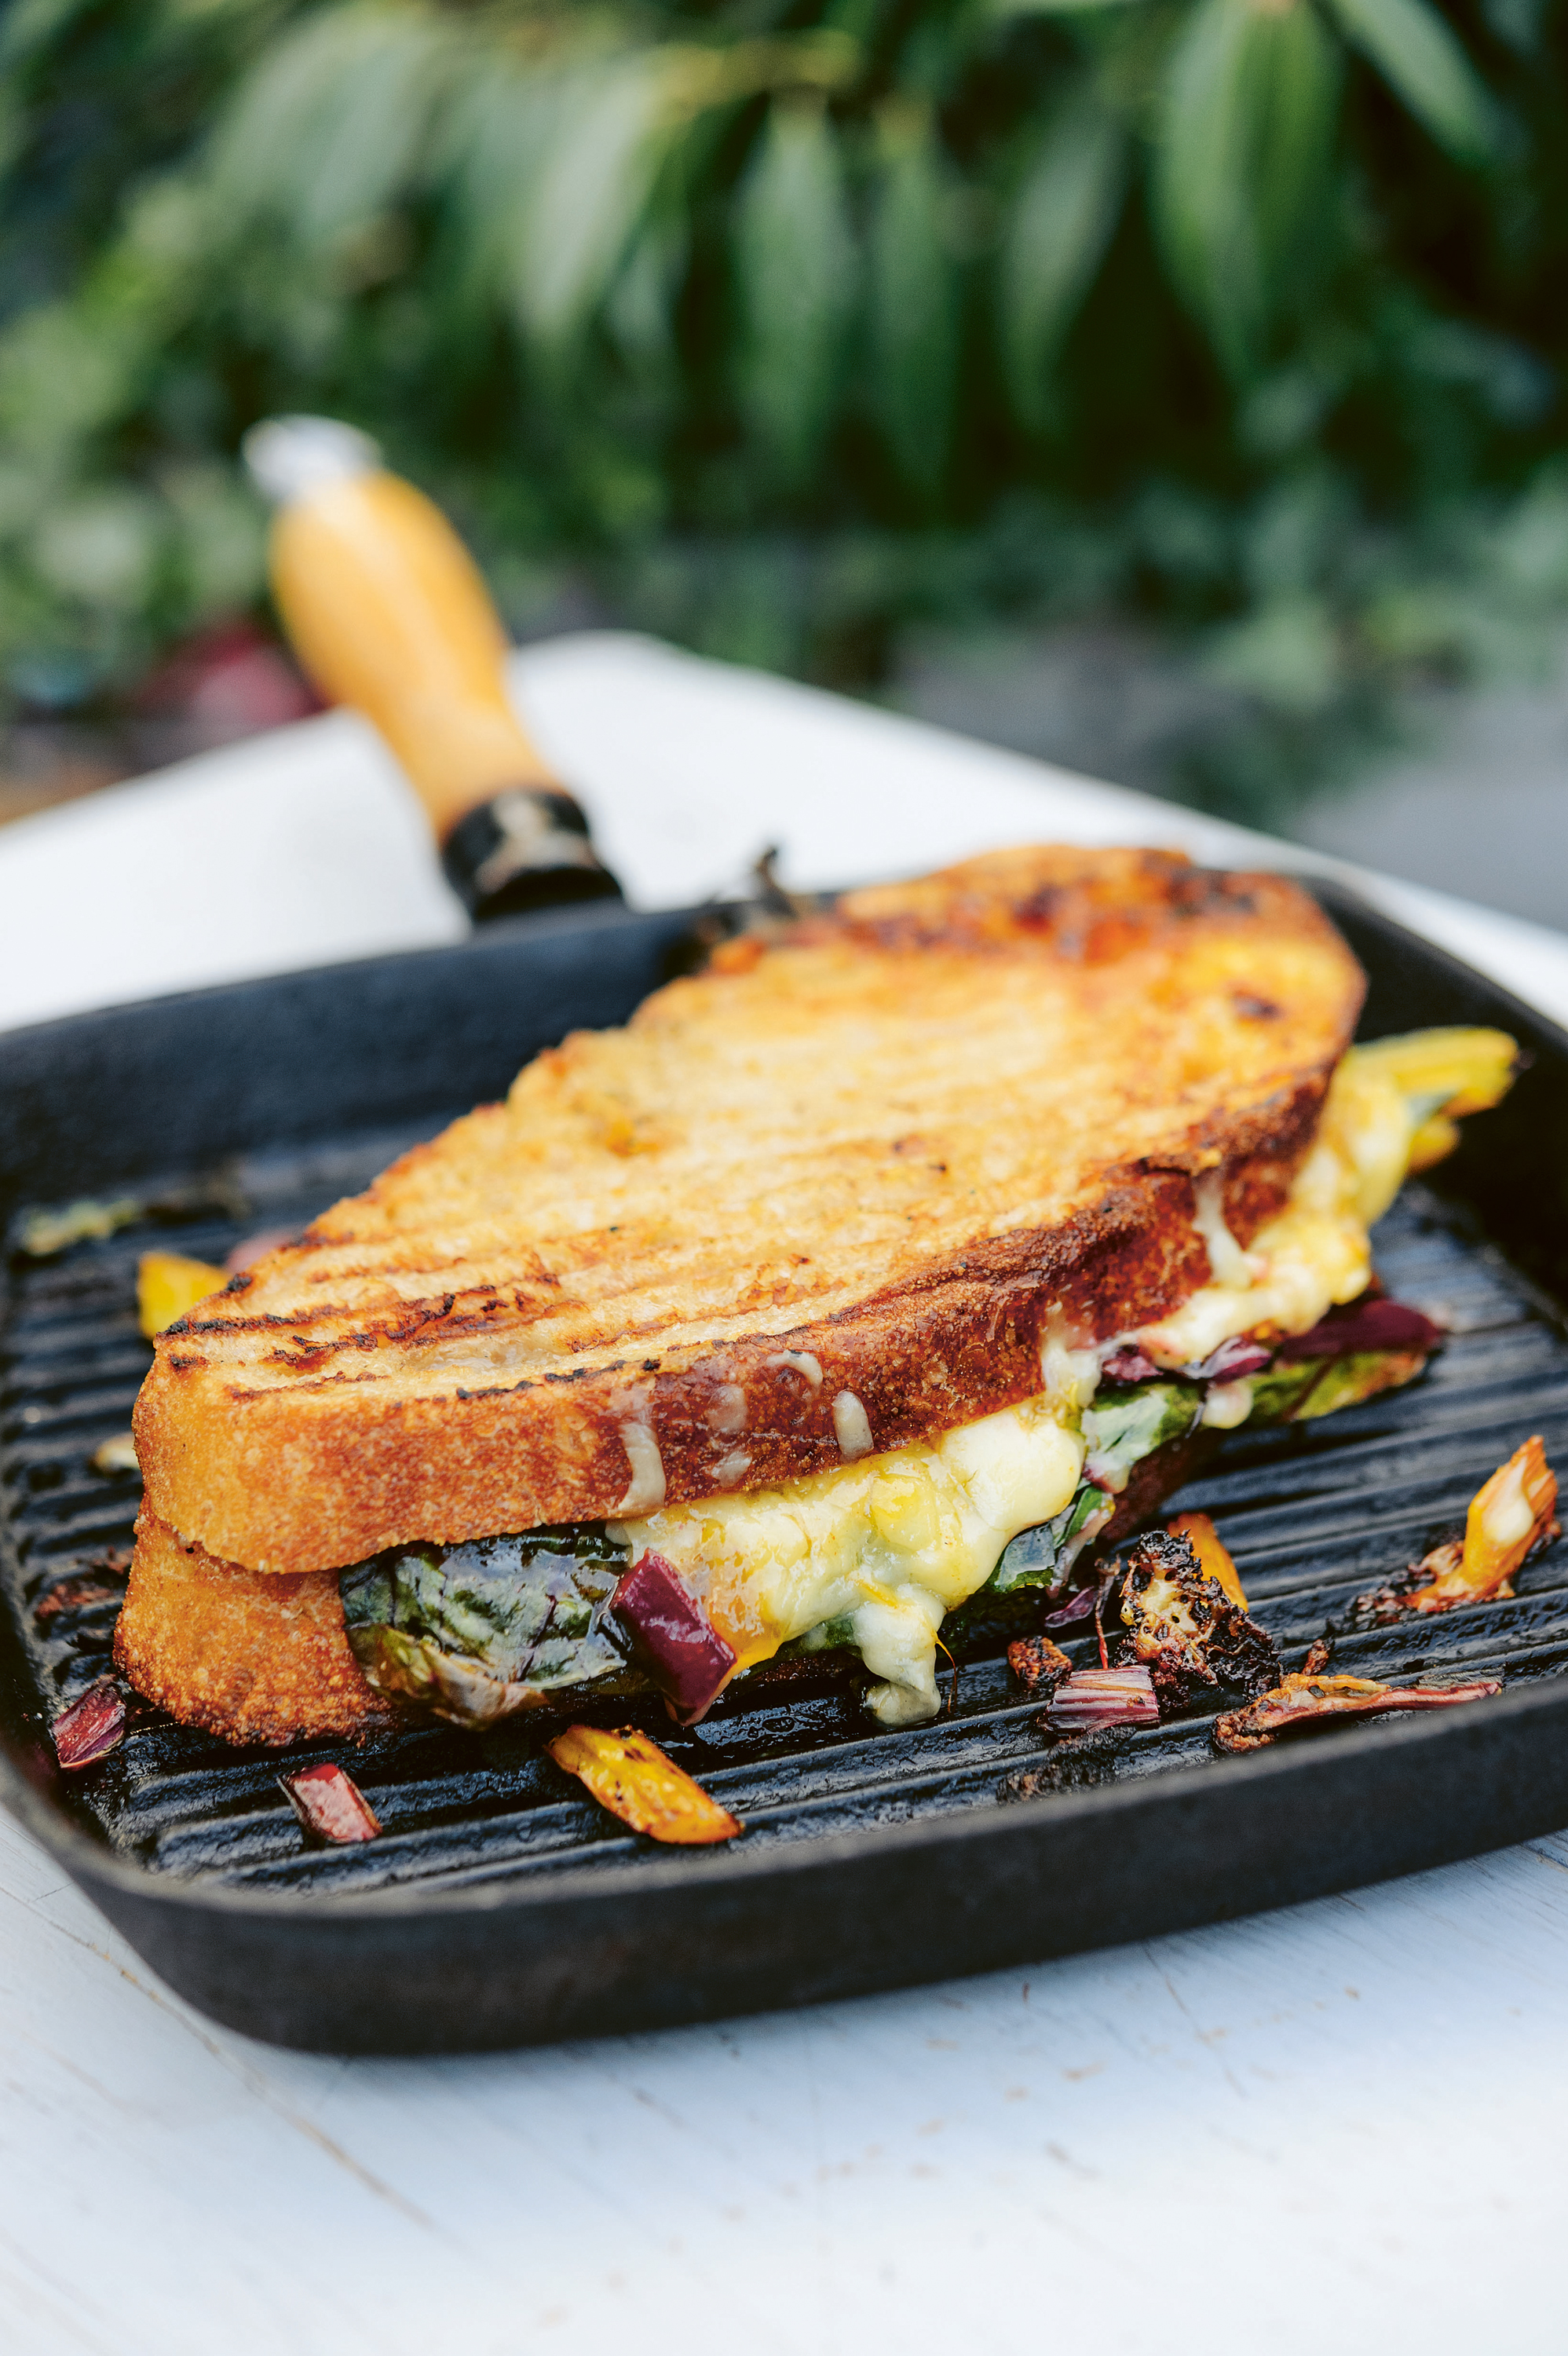 rainbow chard, cheddar and mango chutney cheese toastie from Charred by Genevieve Taylor (Quadrille/Jason Ingram/PA)